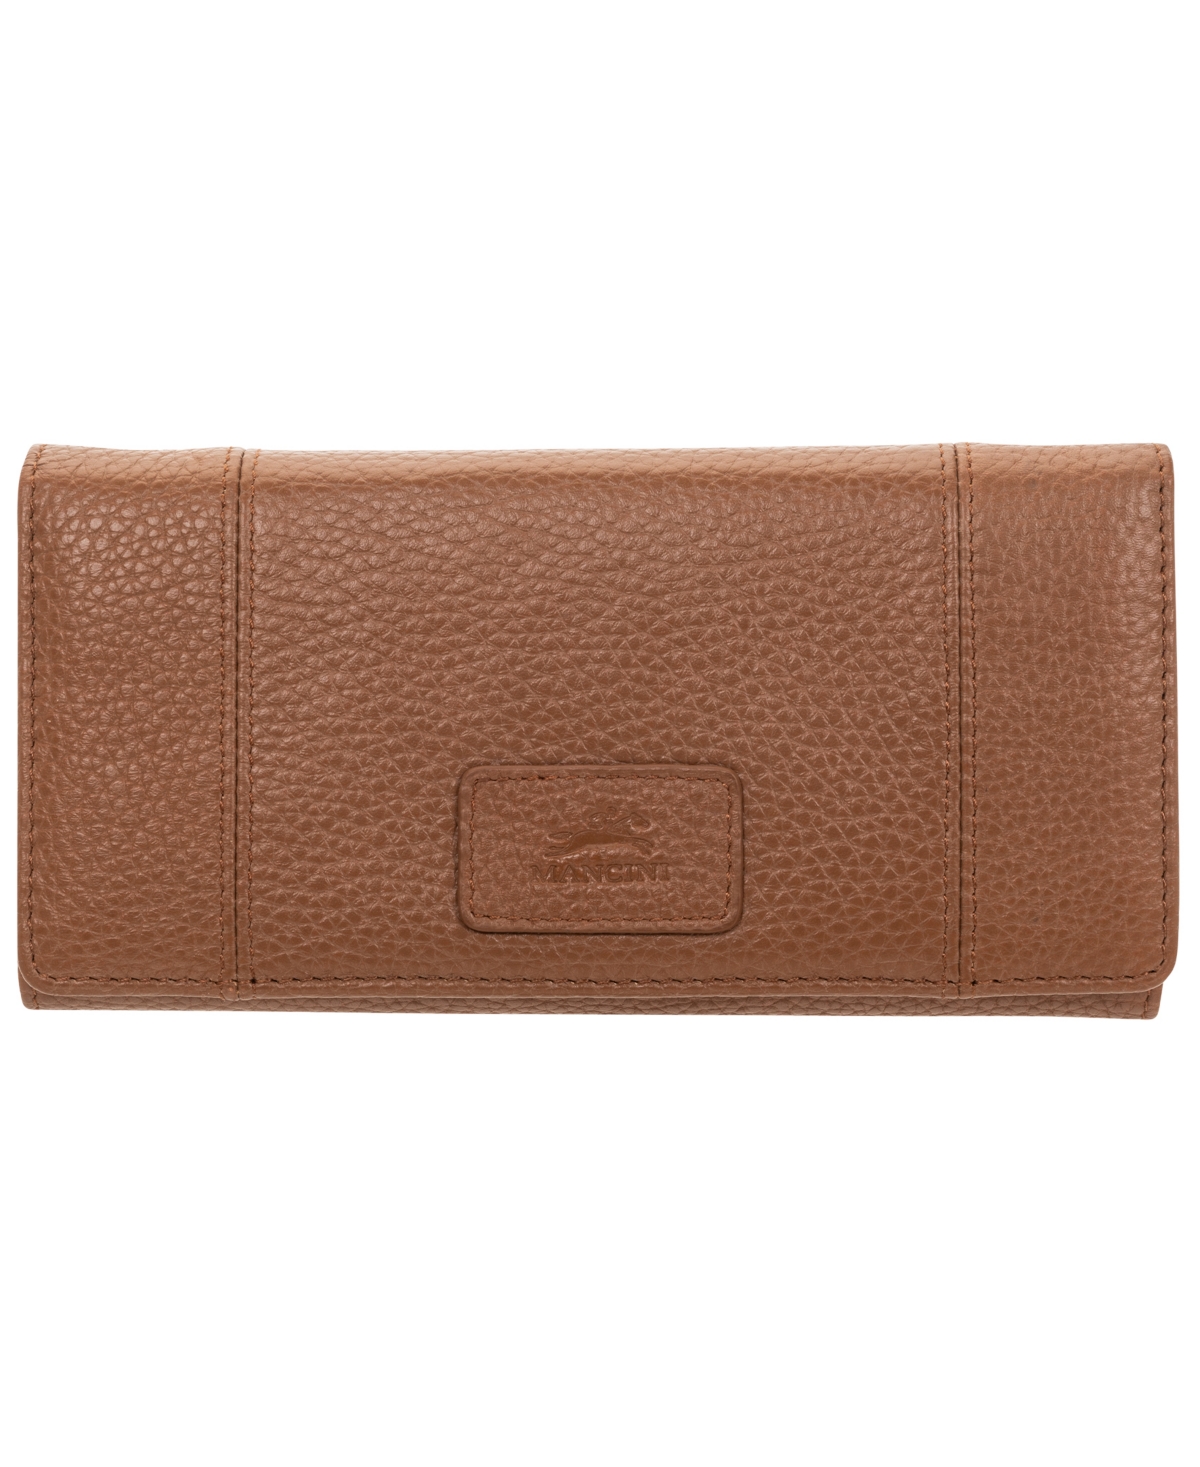 Mancini Women's Pebbled Collection Rfid Secure Trifold Wallet